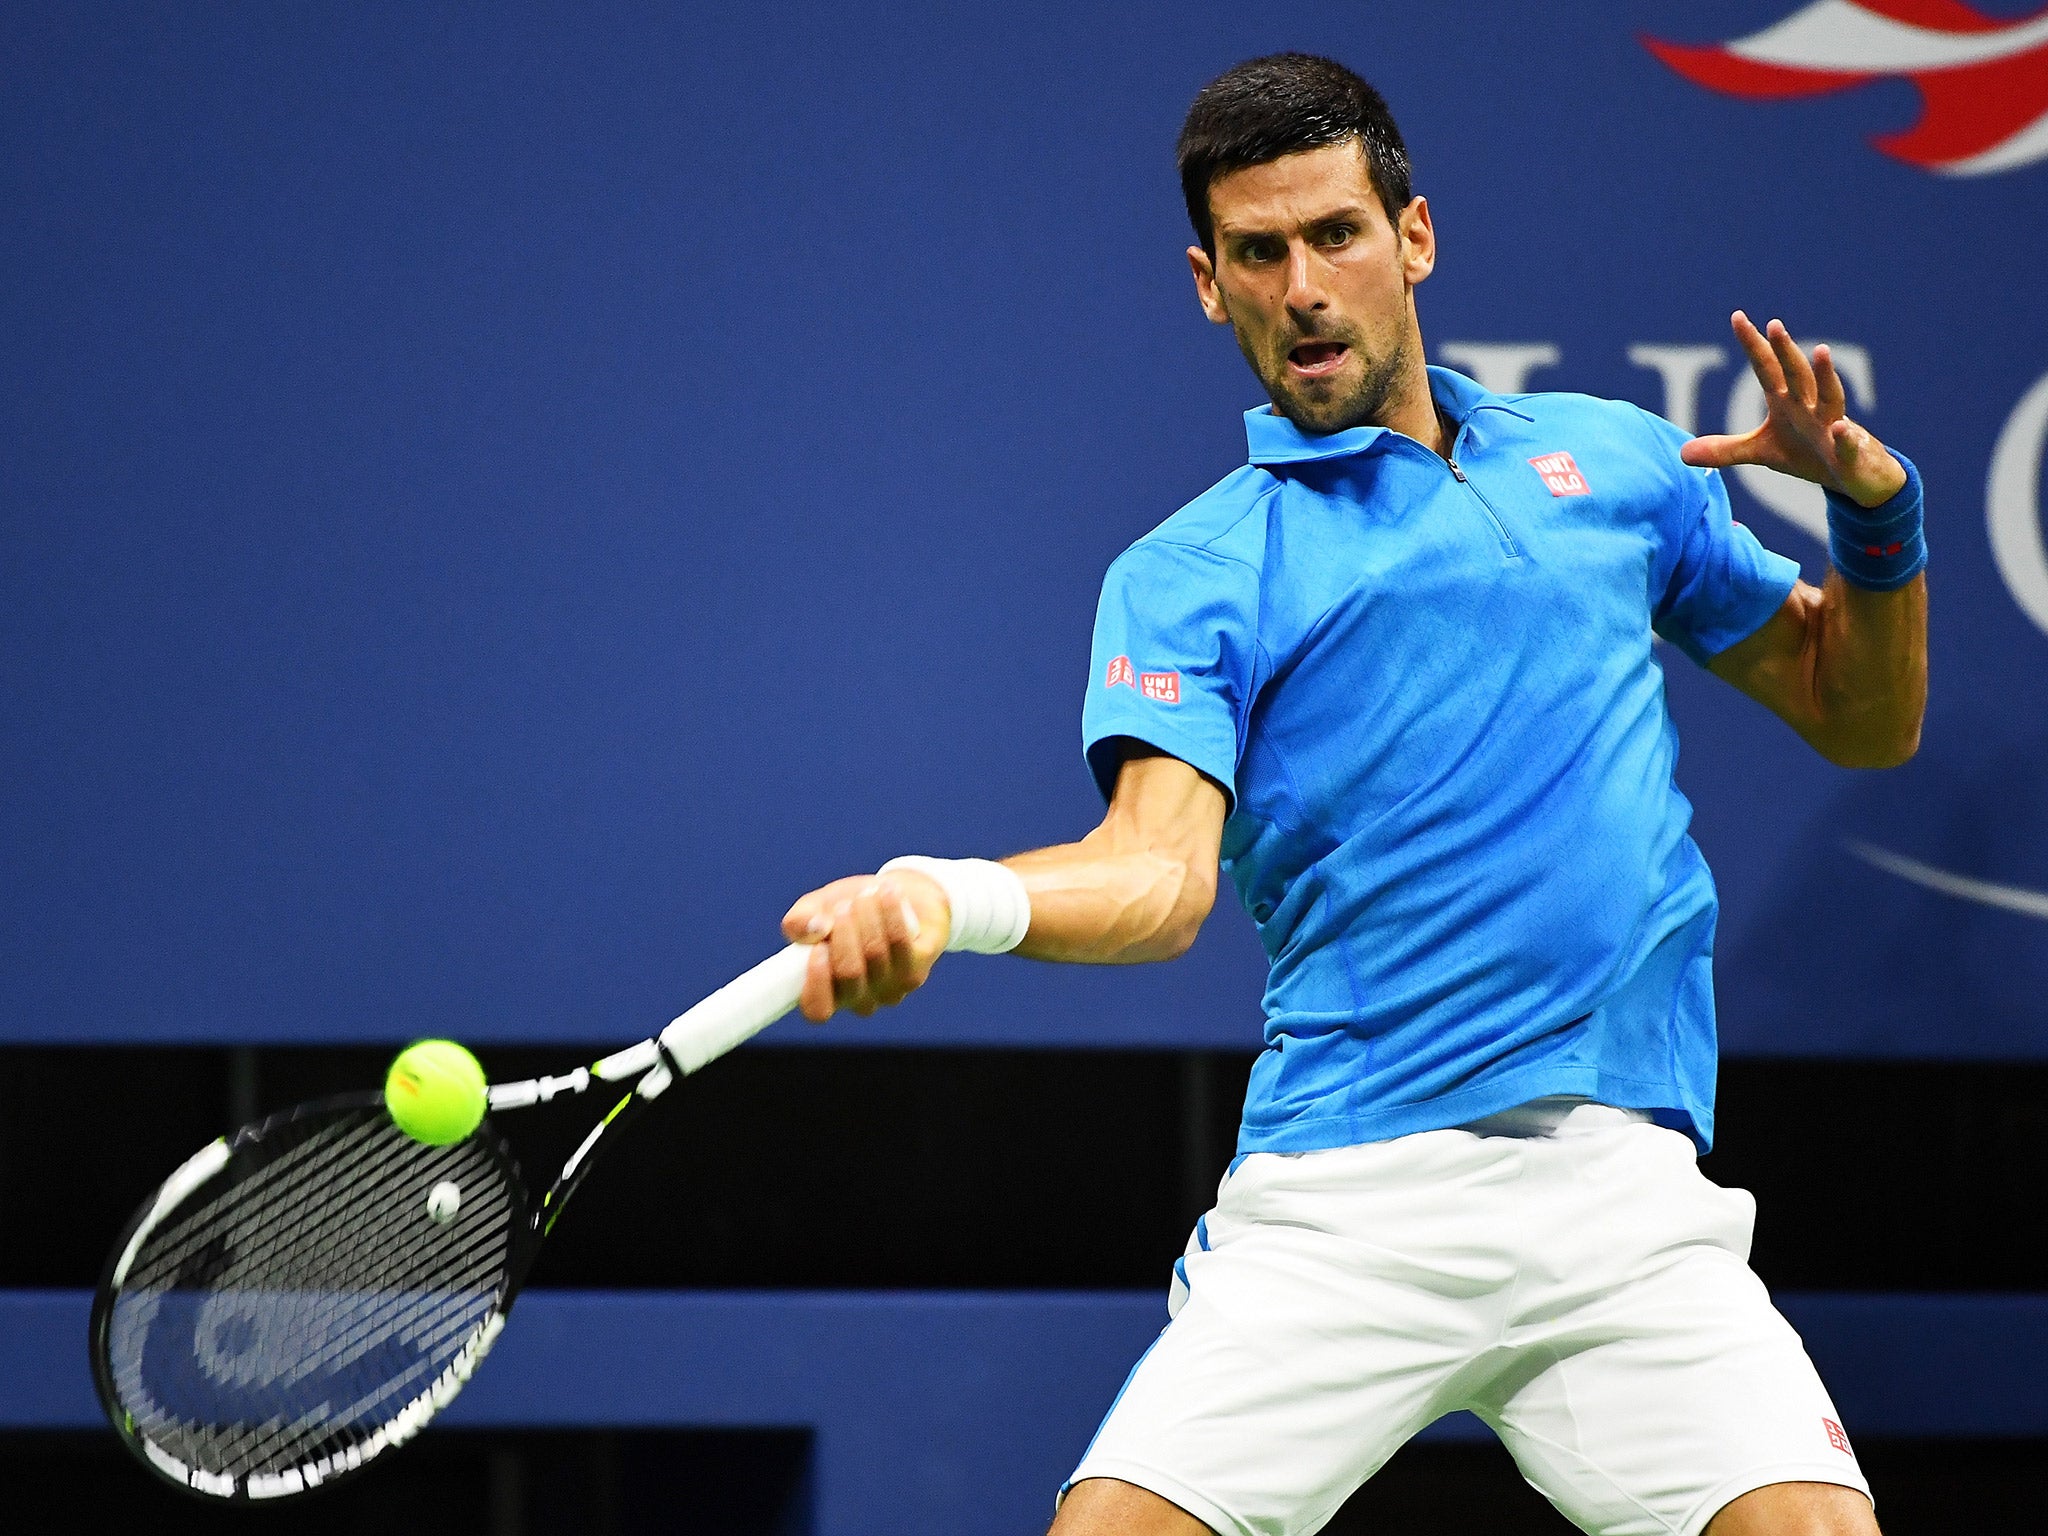 Djokovic took the first two sets and looked to be on his way to victory regardless of Tsonga's injury